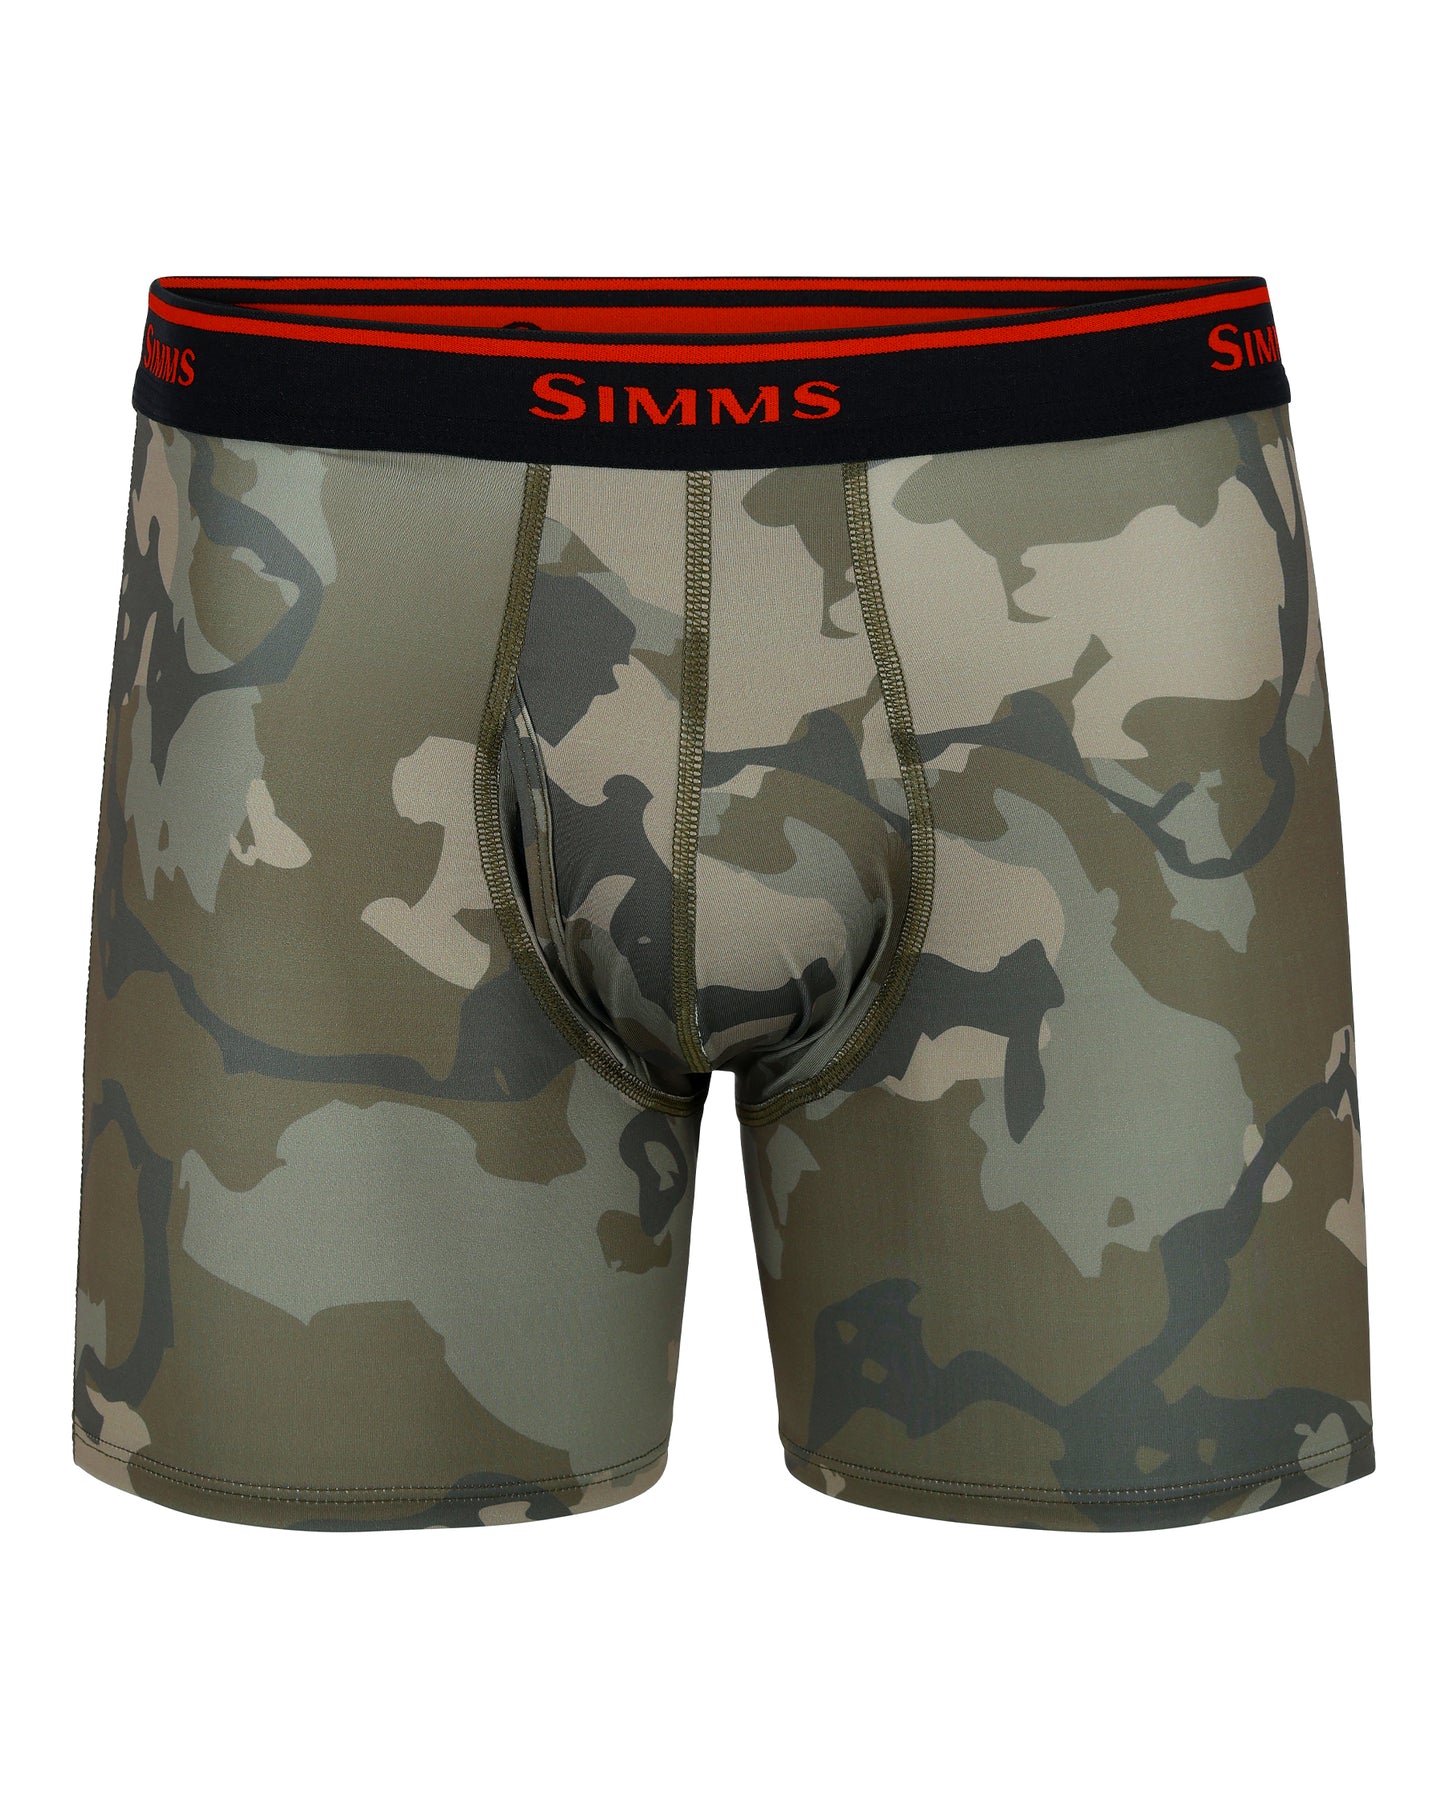    12916-1082-simms-boxer-brief-Mannequin-s23-front -rollover